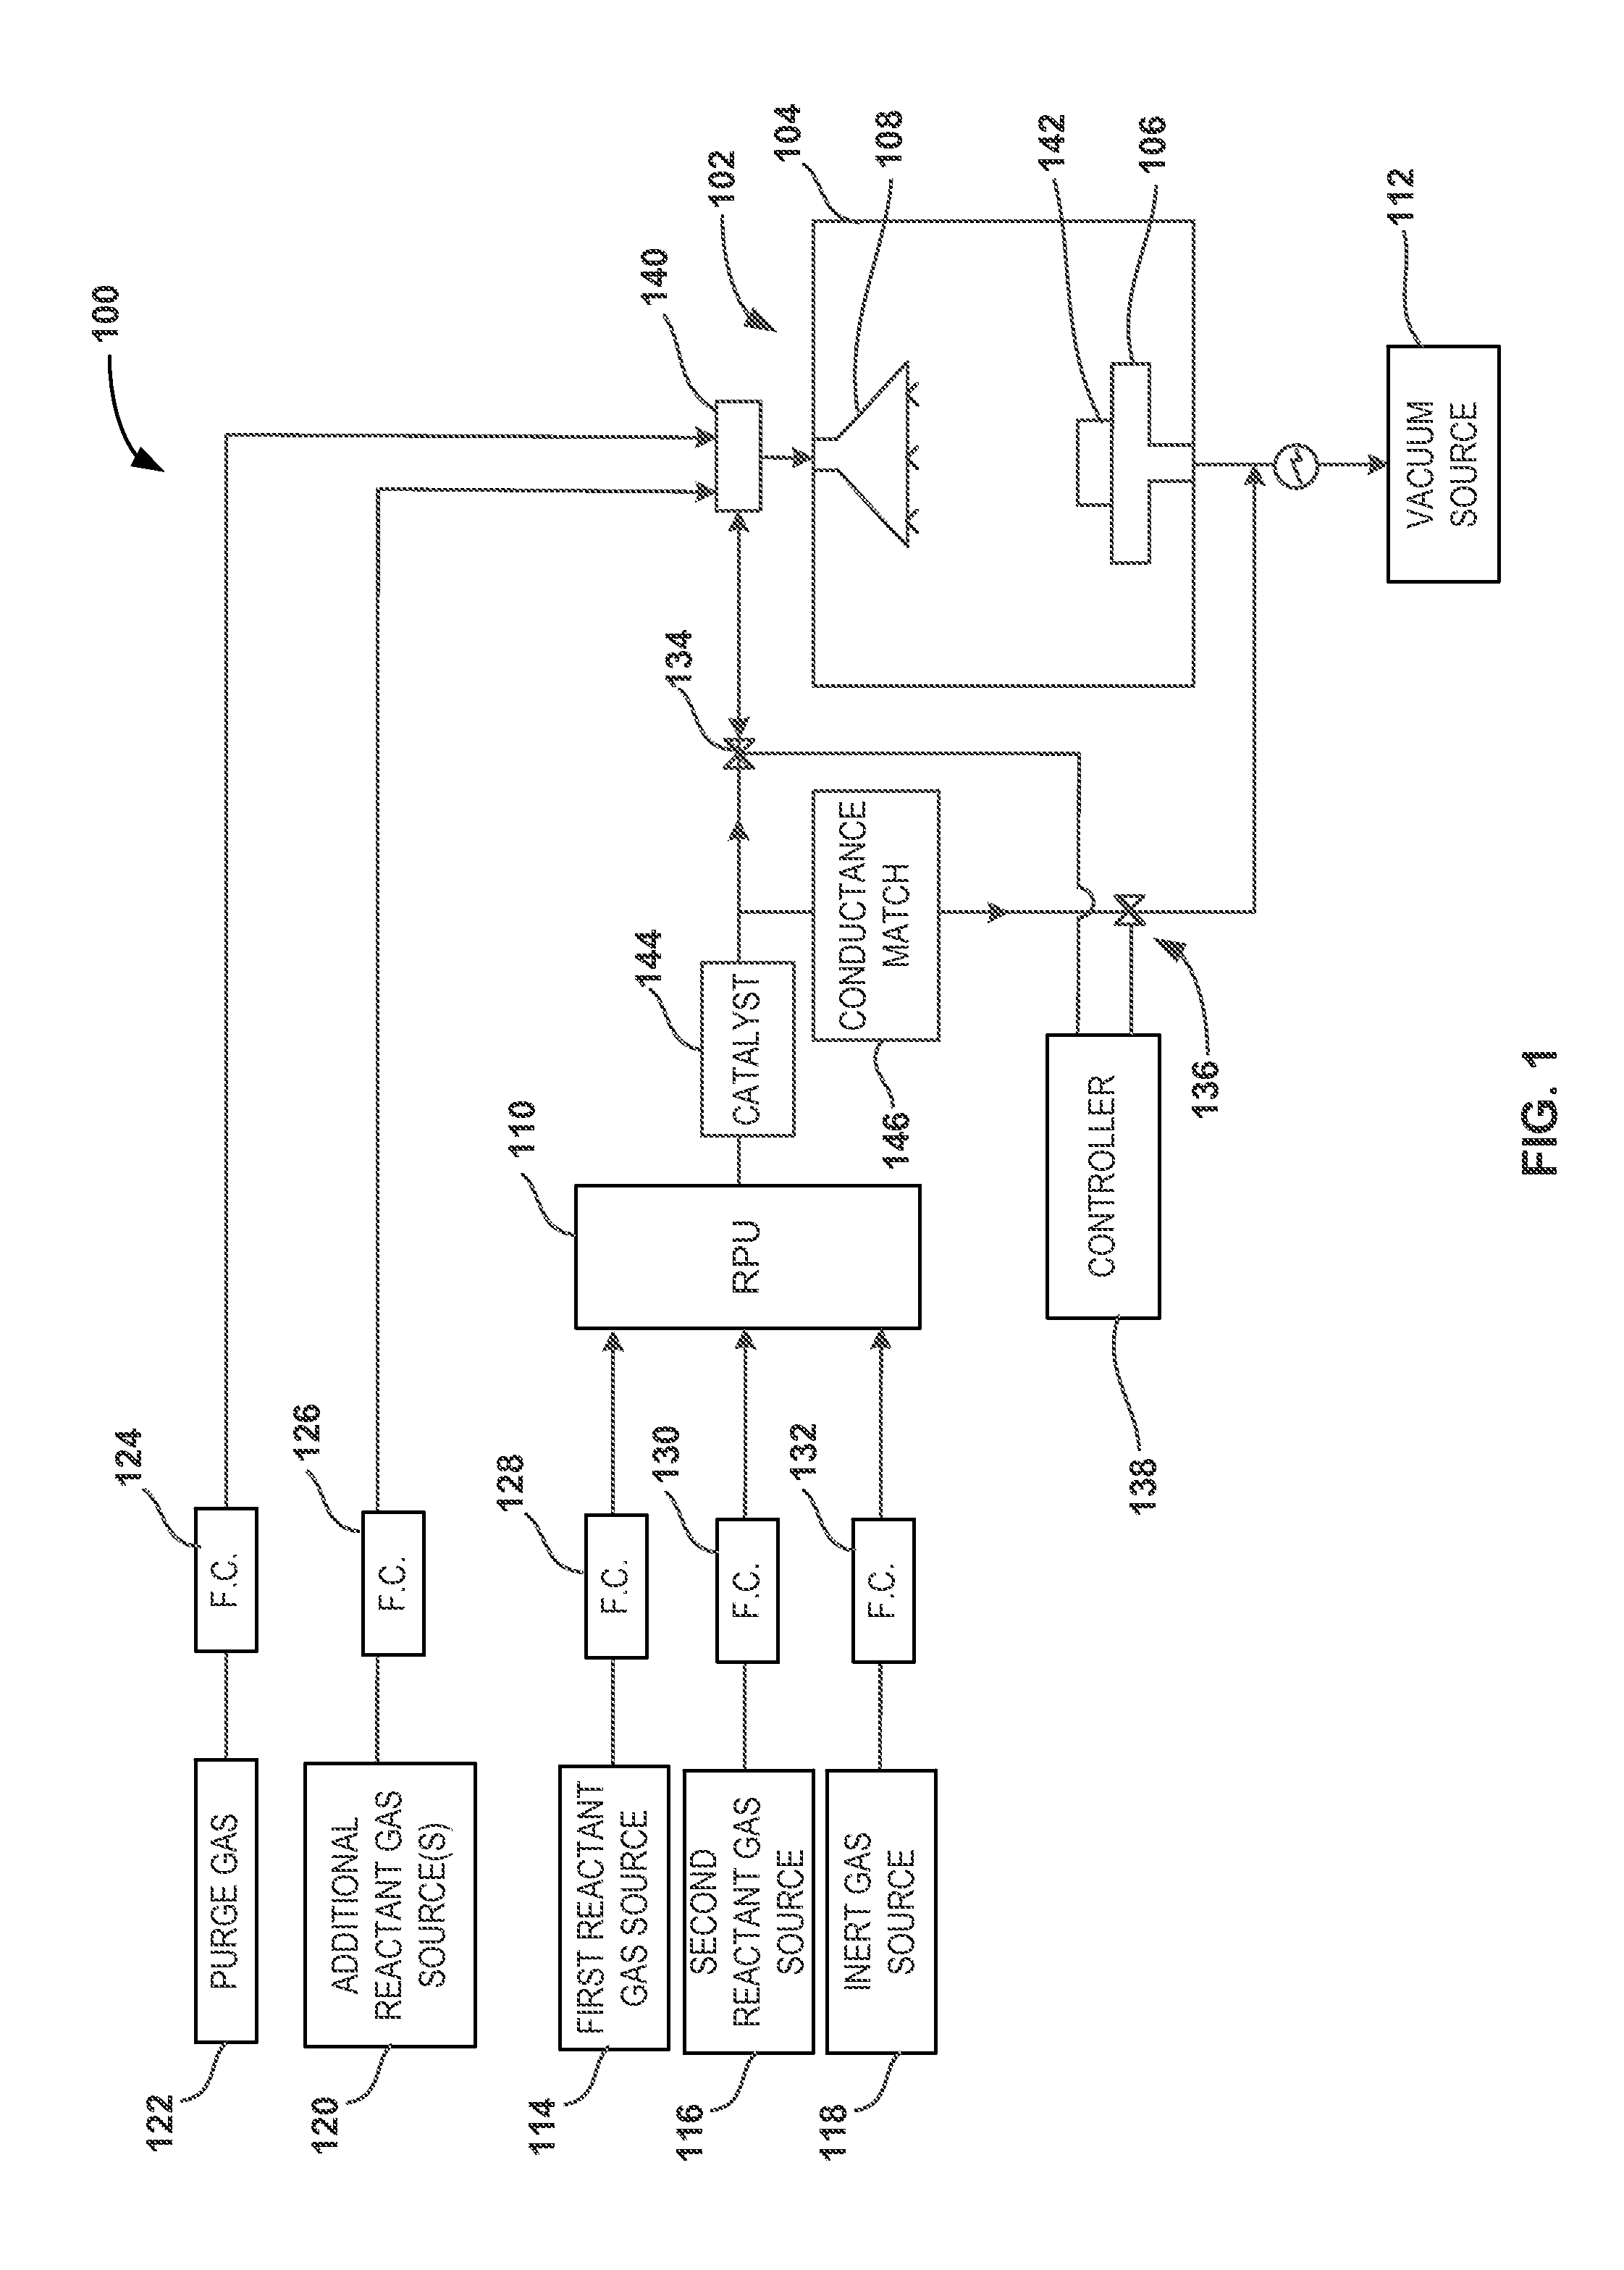 Method and systems for in-situ formation of intermediate reactive species